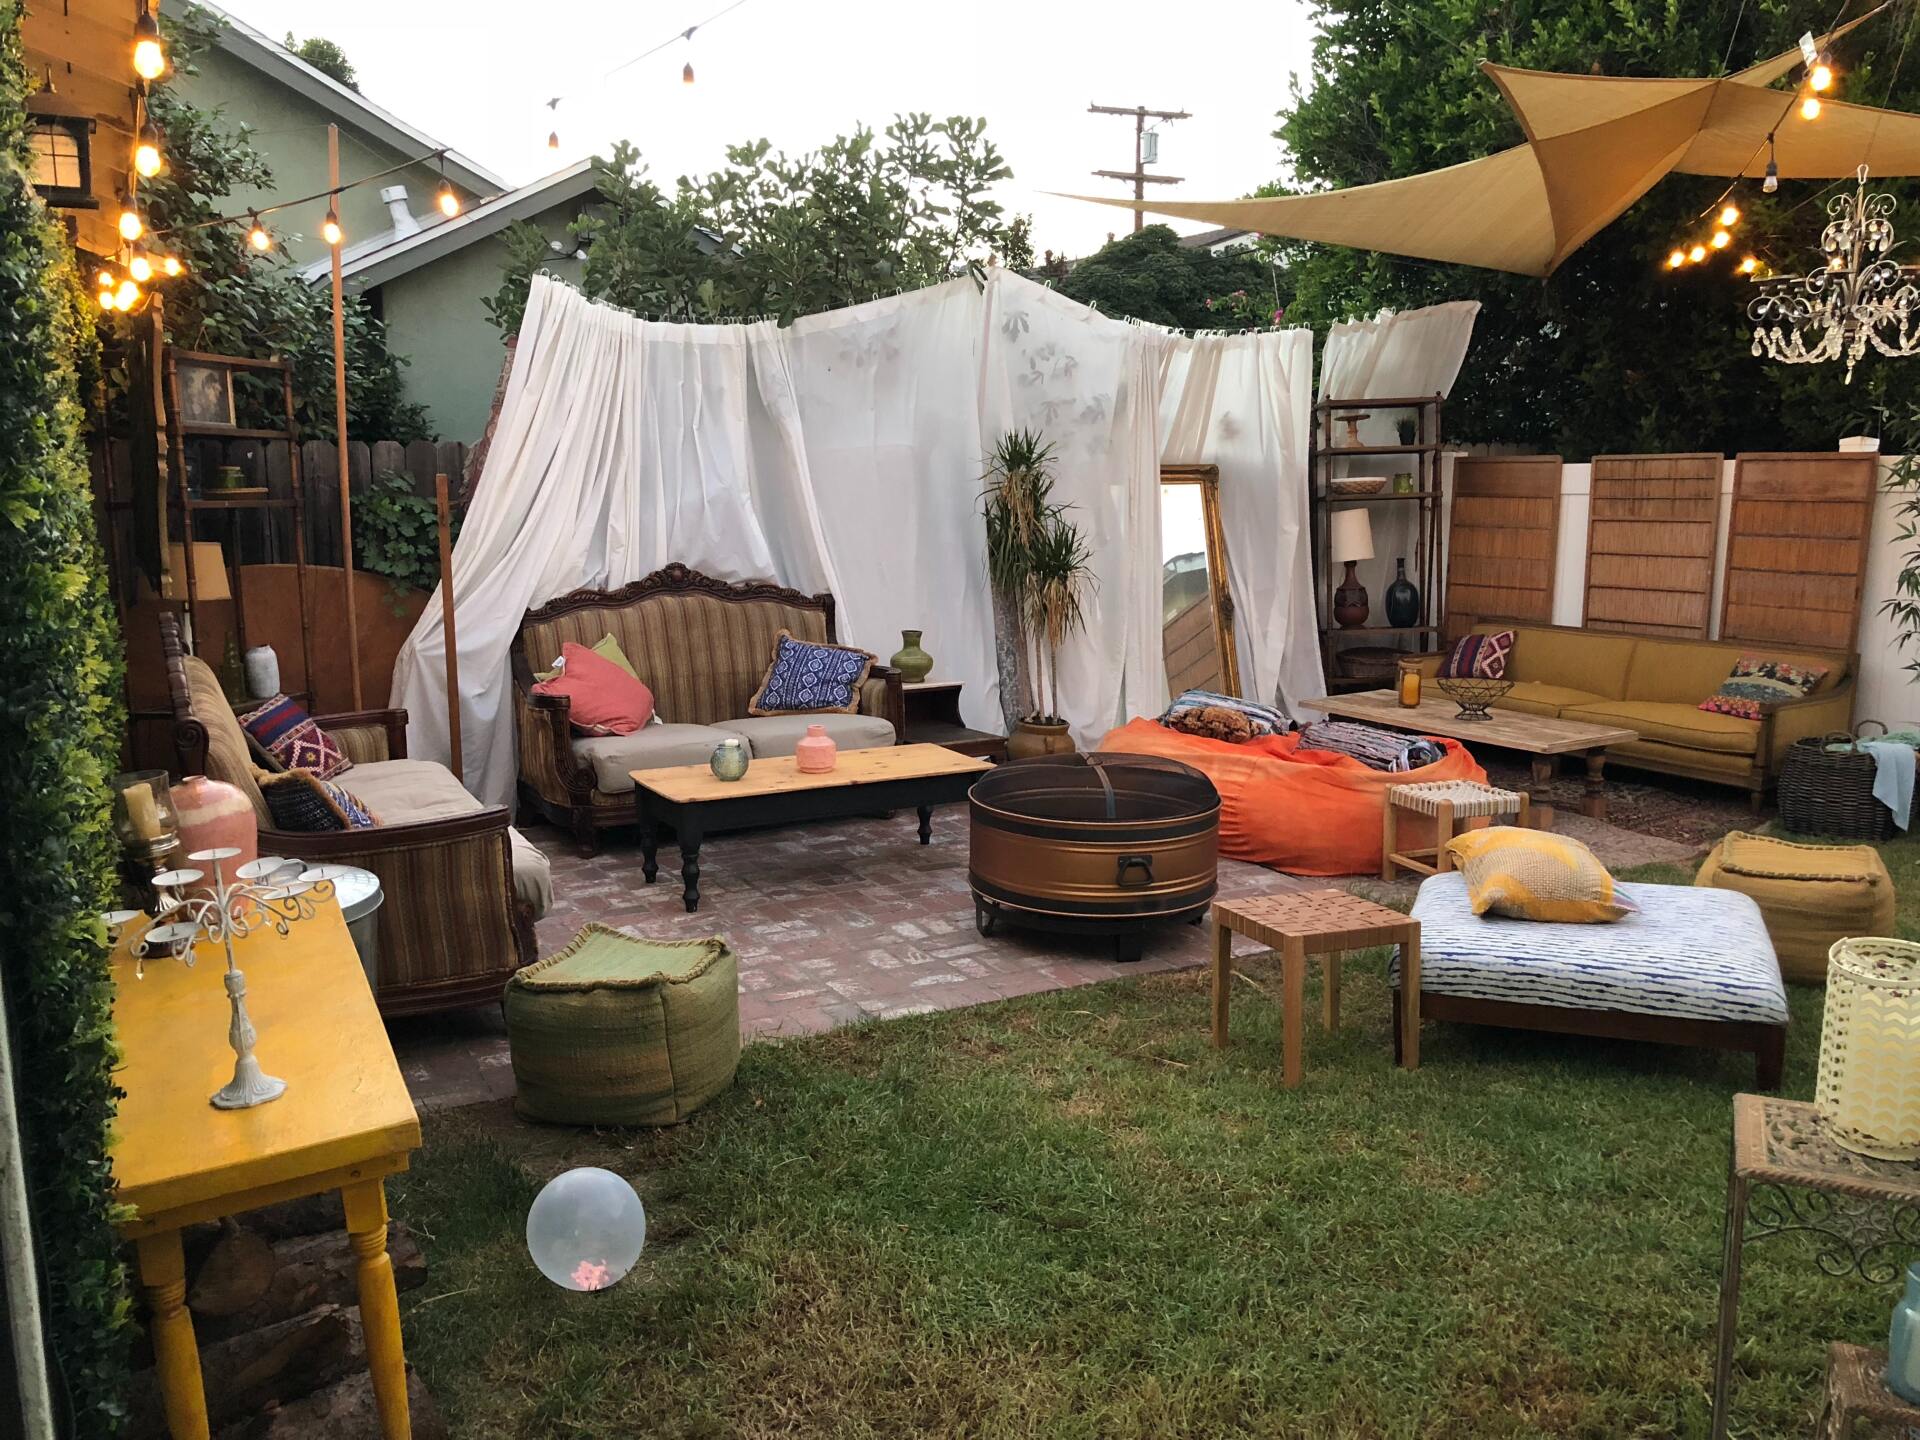 Decorated Backyard for a Party| Green Garden Landscaping